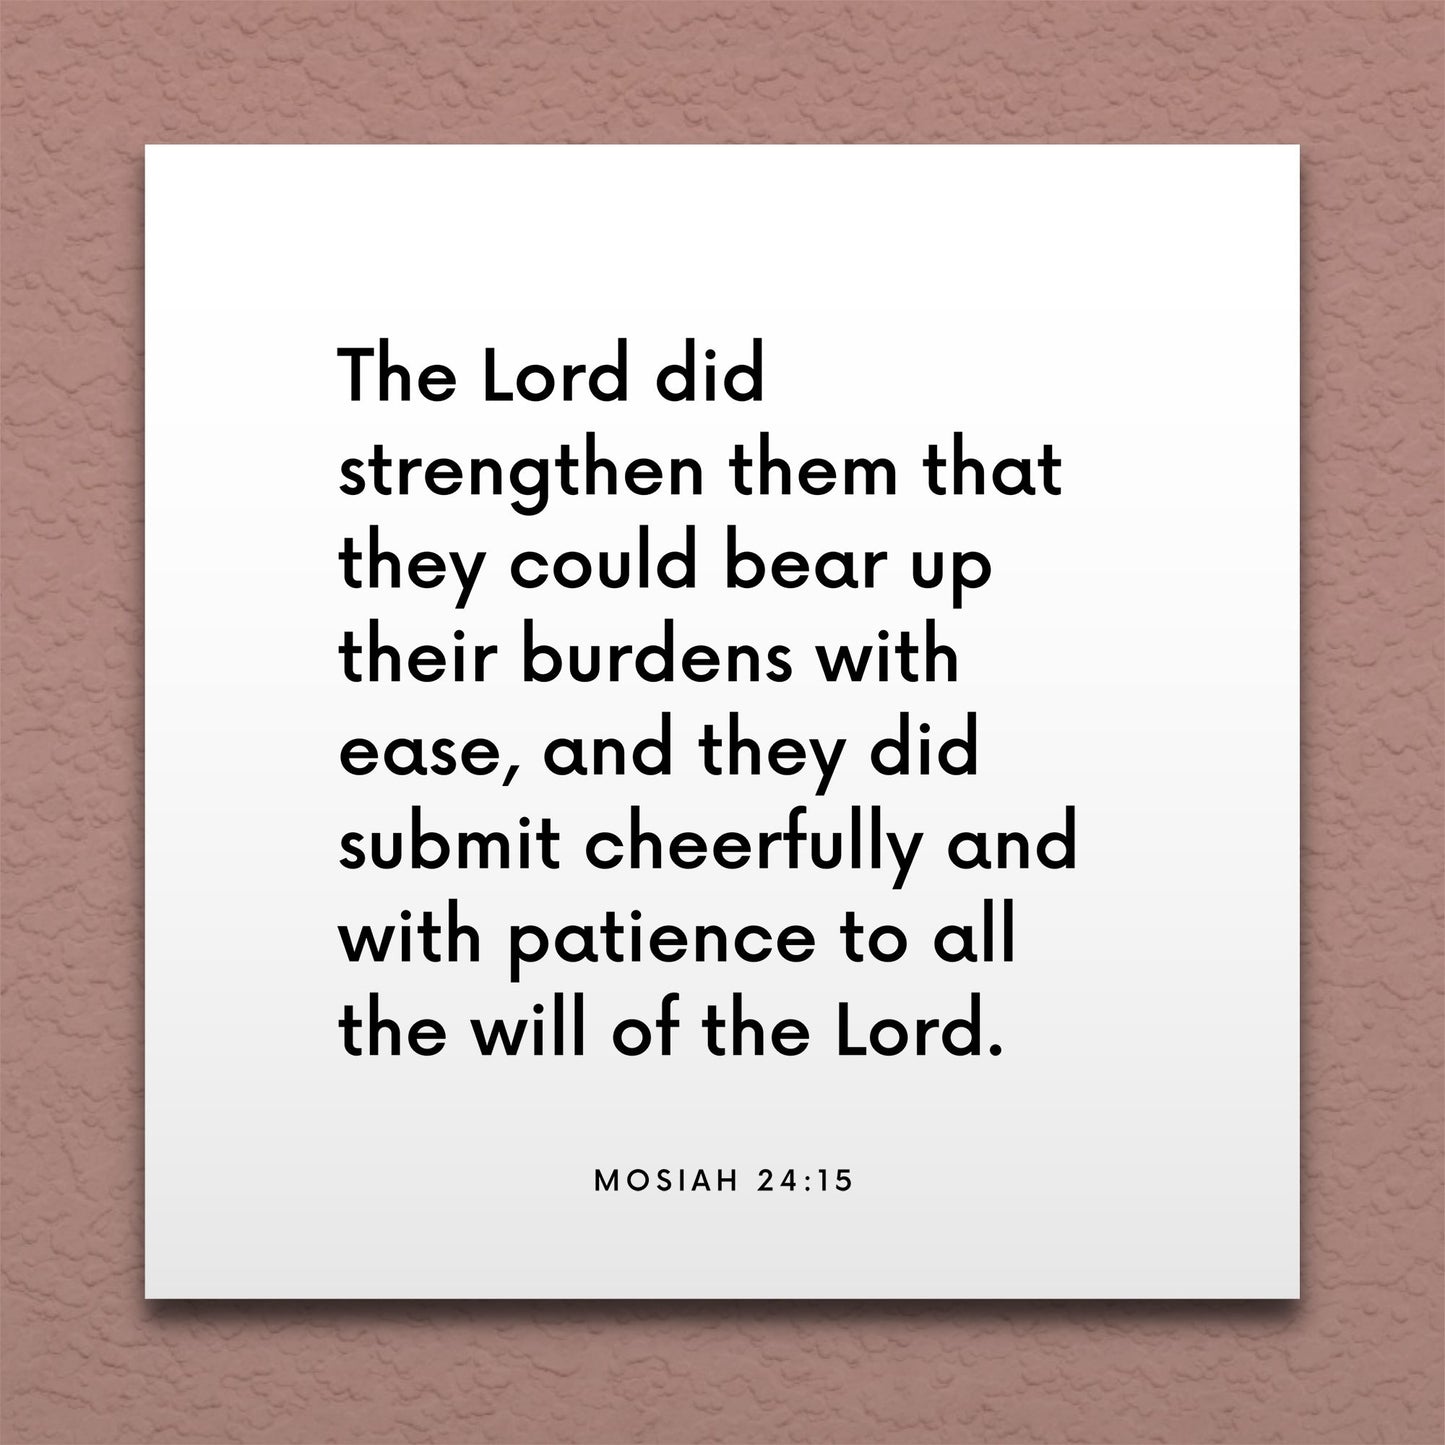 Wall-mounted scripture tile for Mosiah 24:15 - "They did submit cheerfully and with patience"